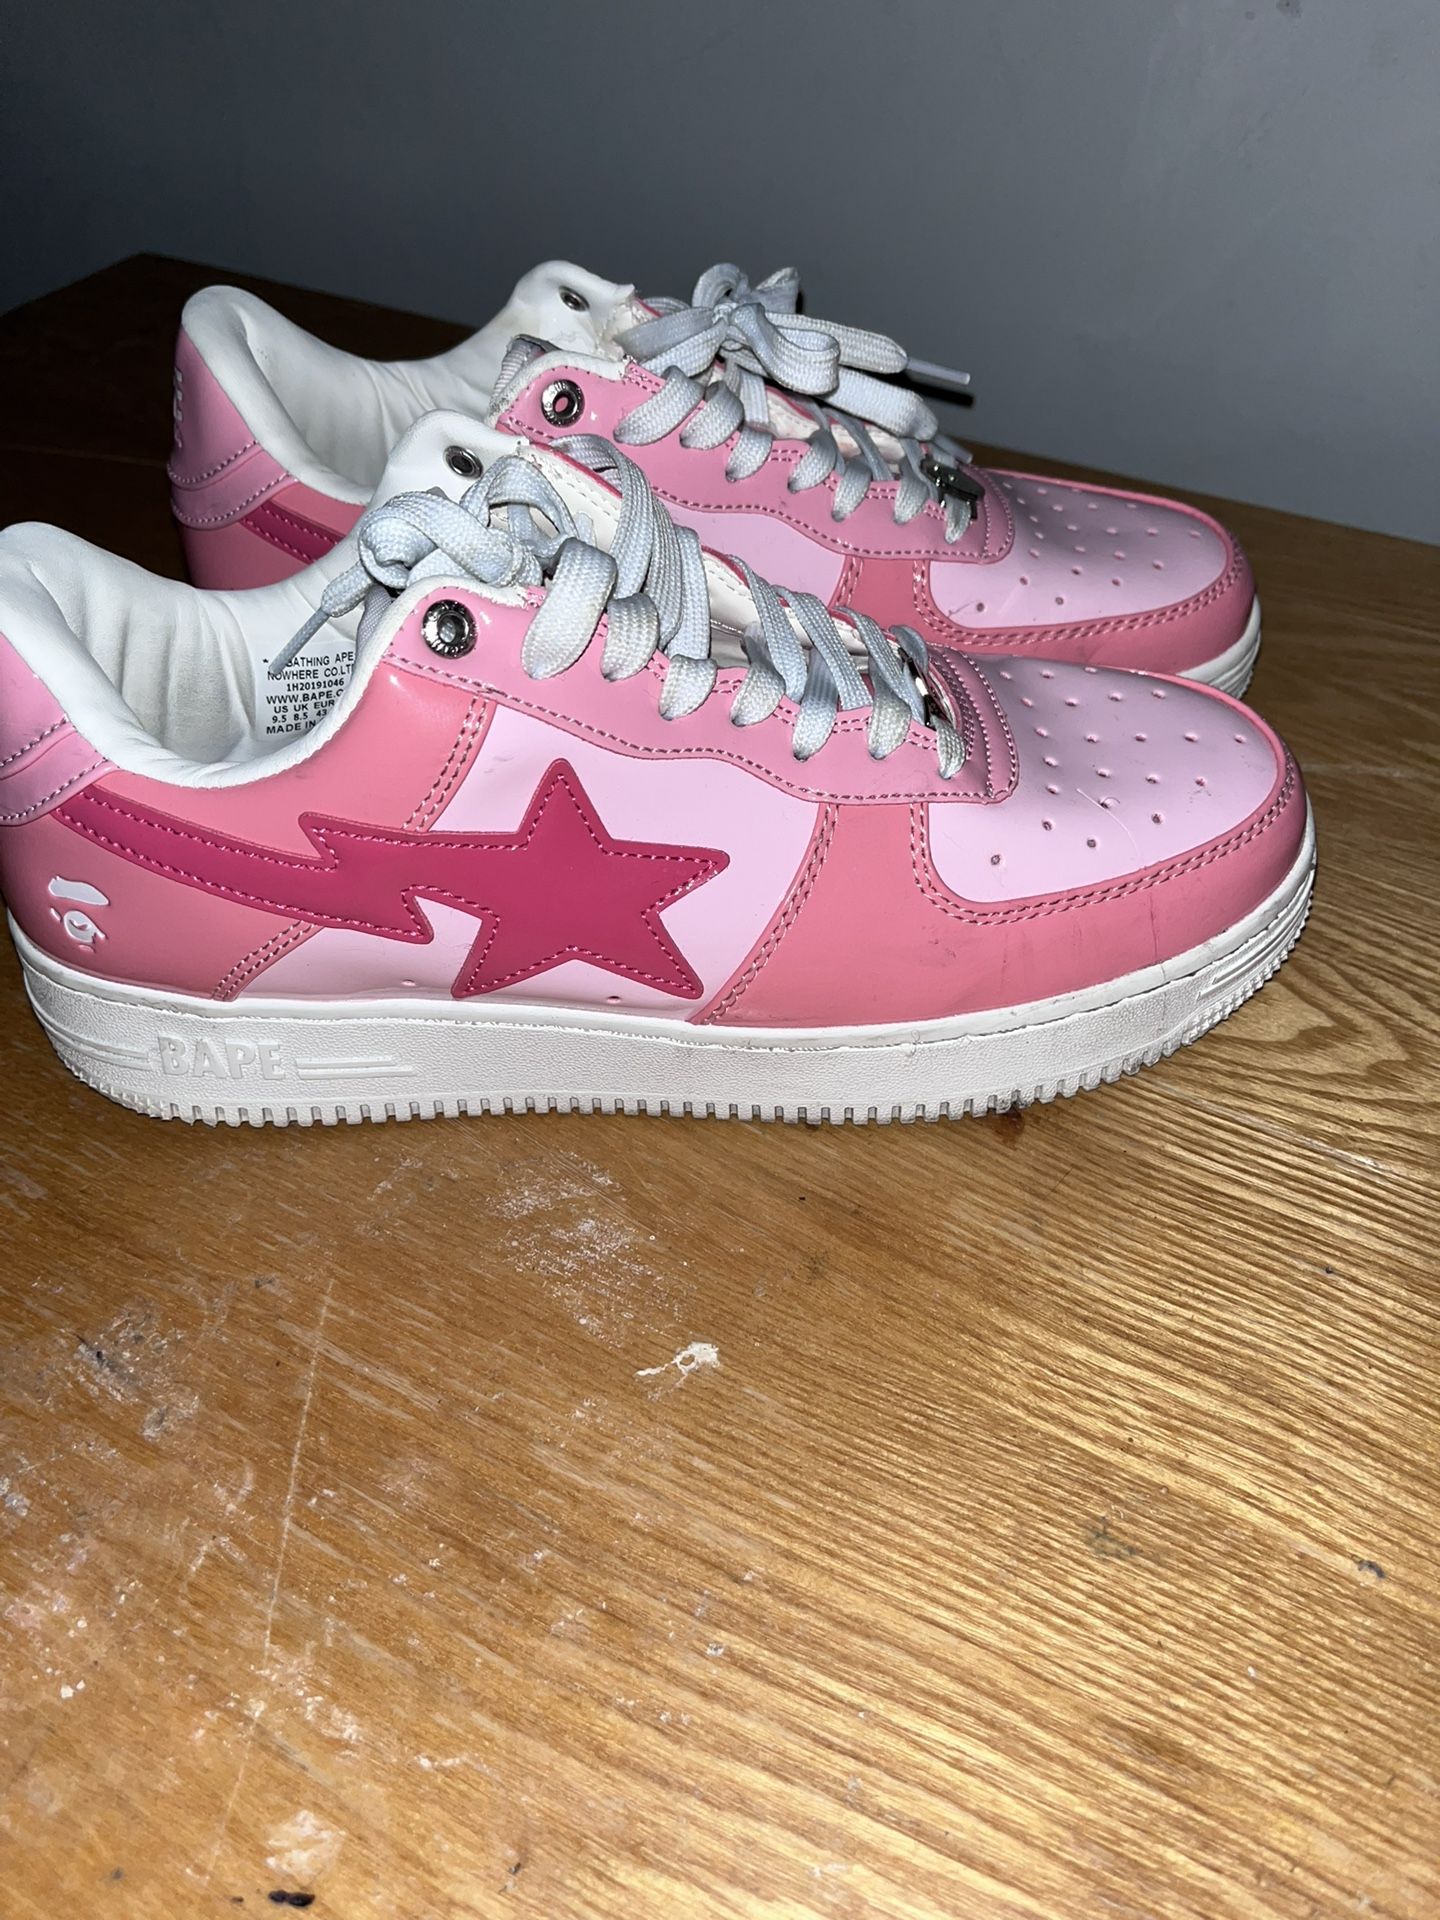 Red Bape Shoes 